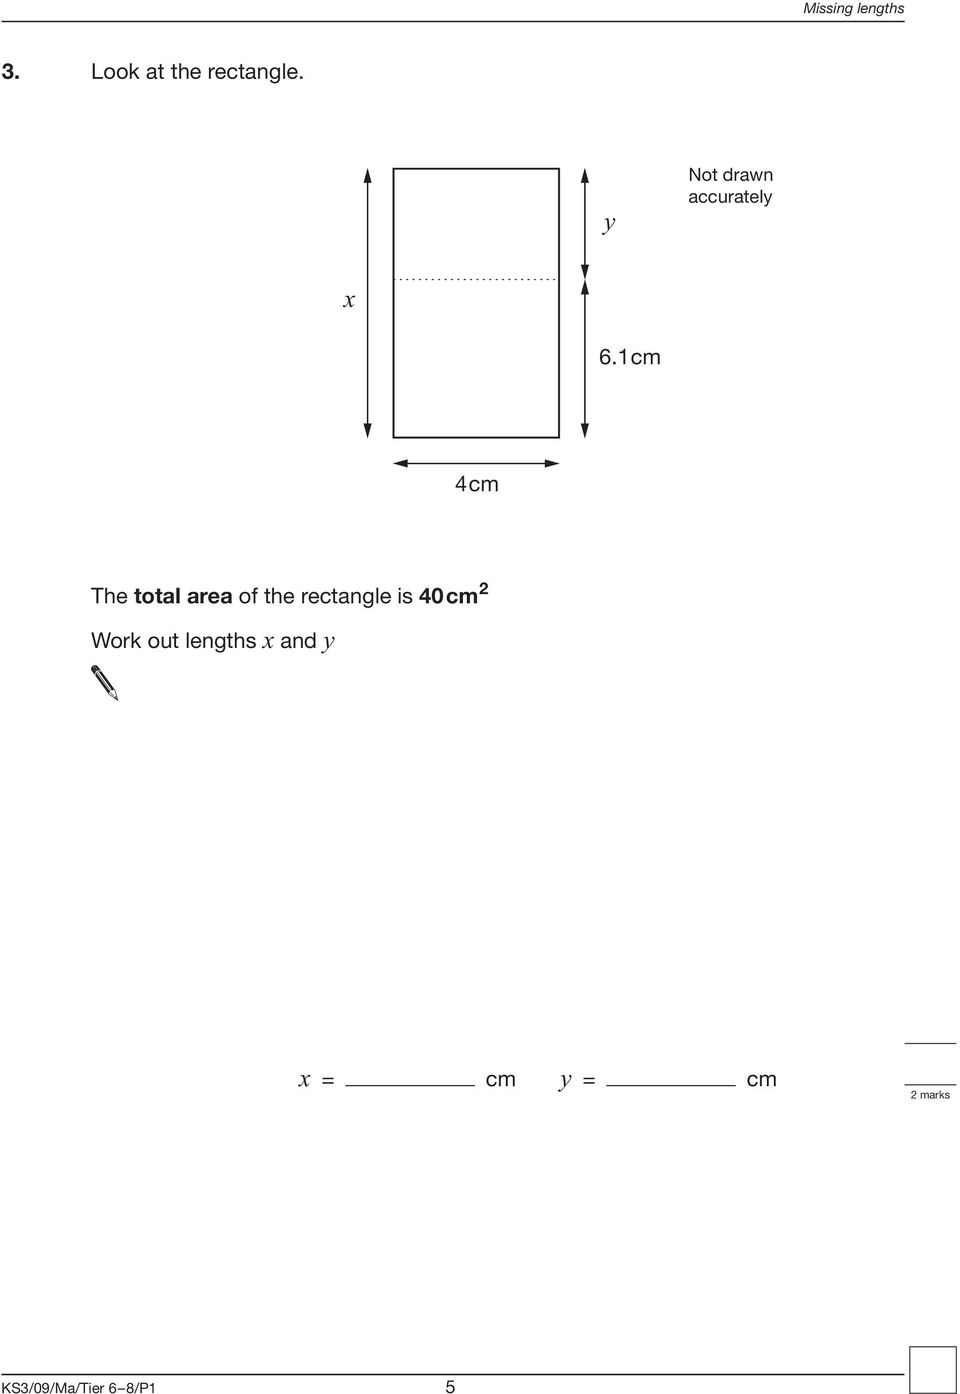 1cm 4cm The total area of the rectangle is